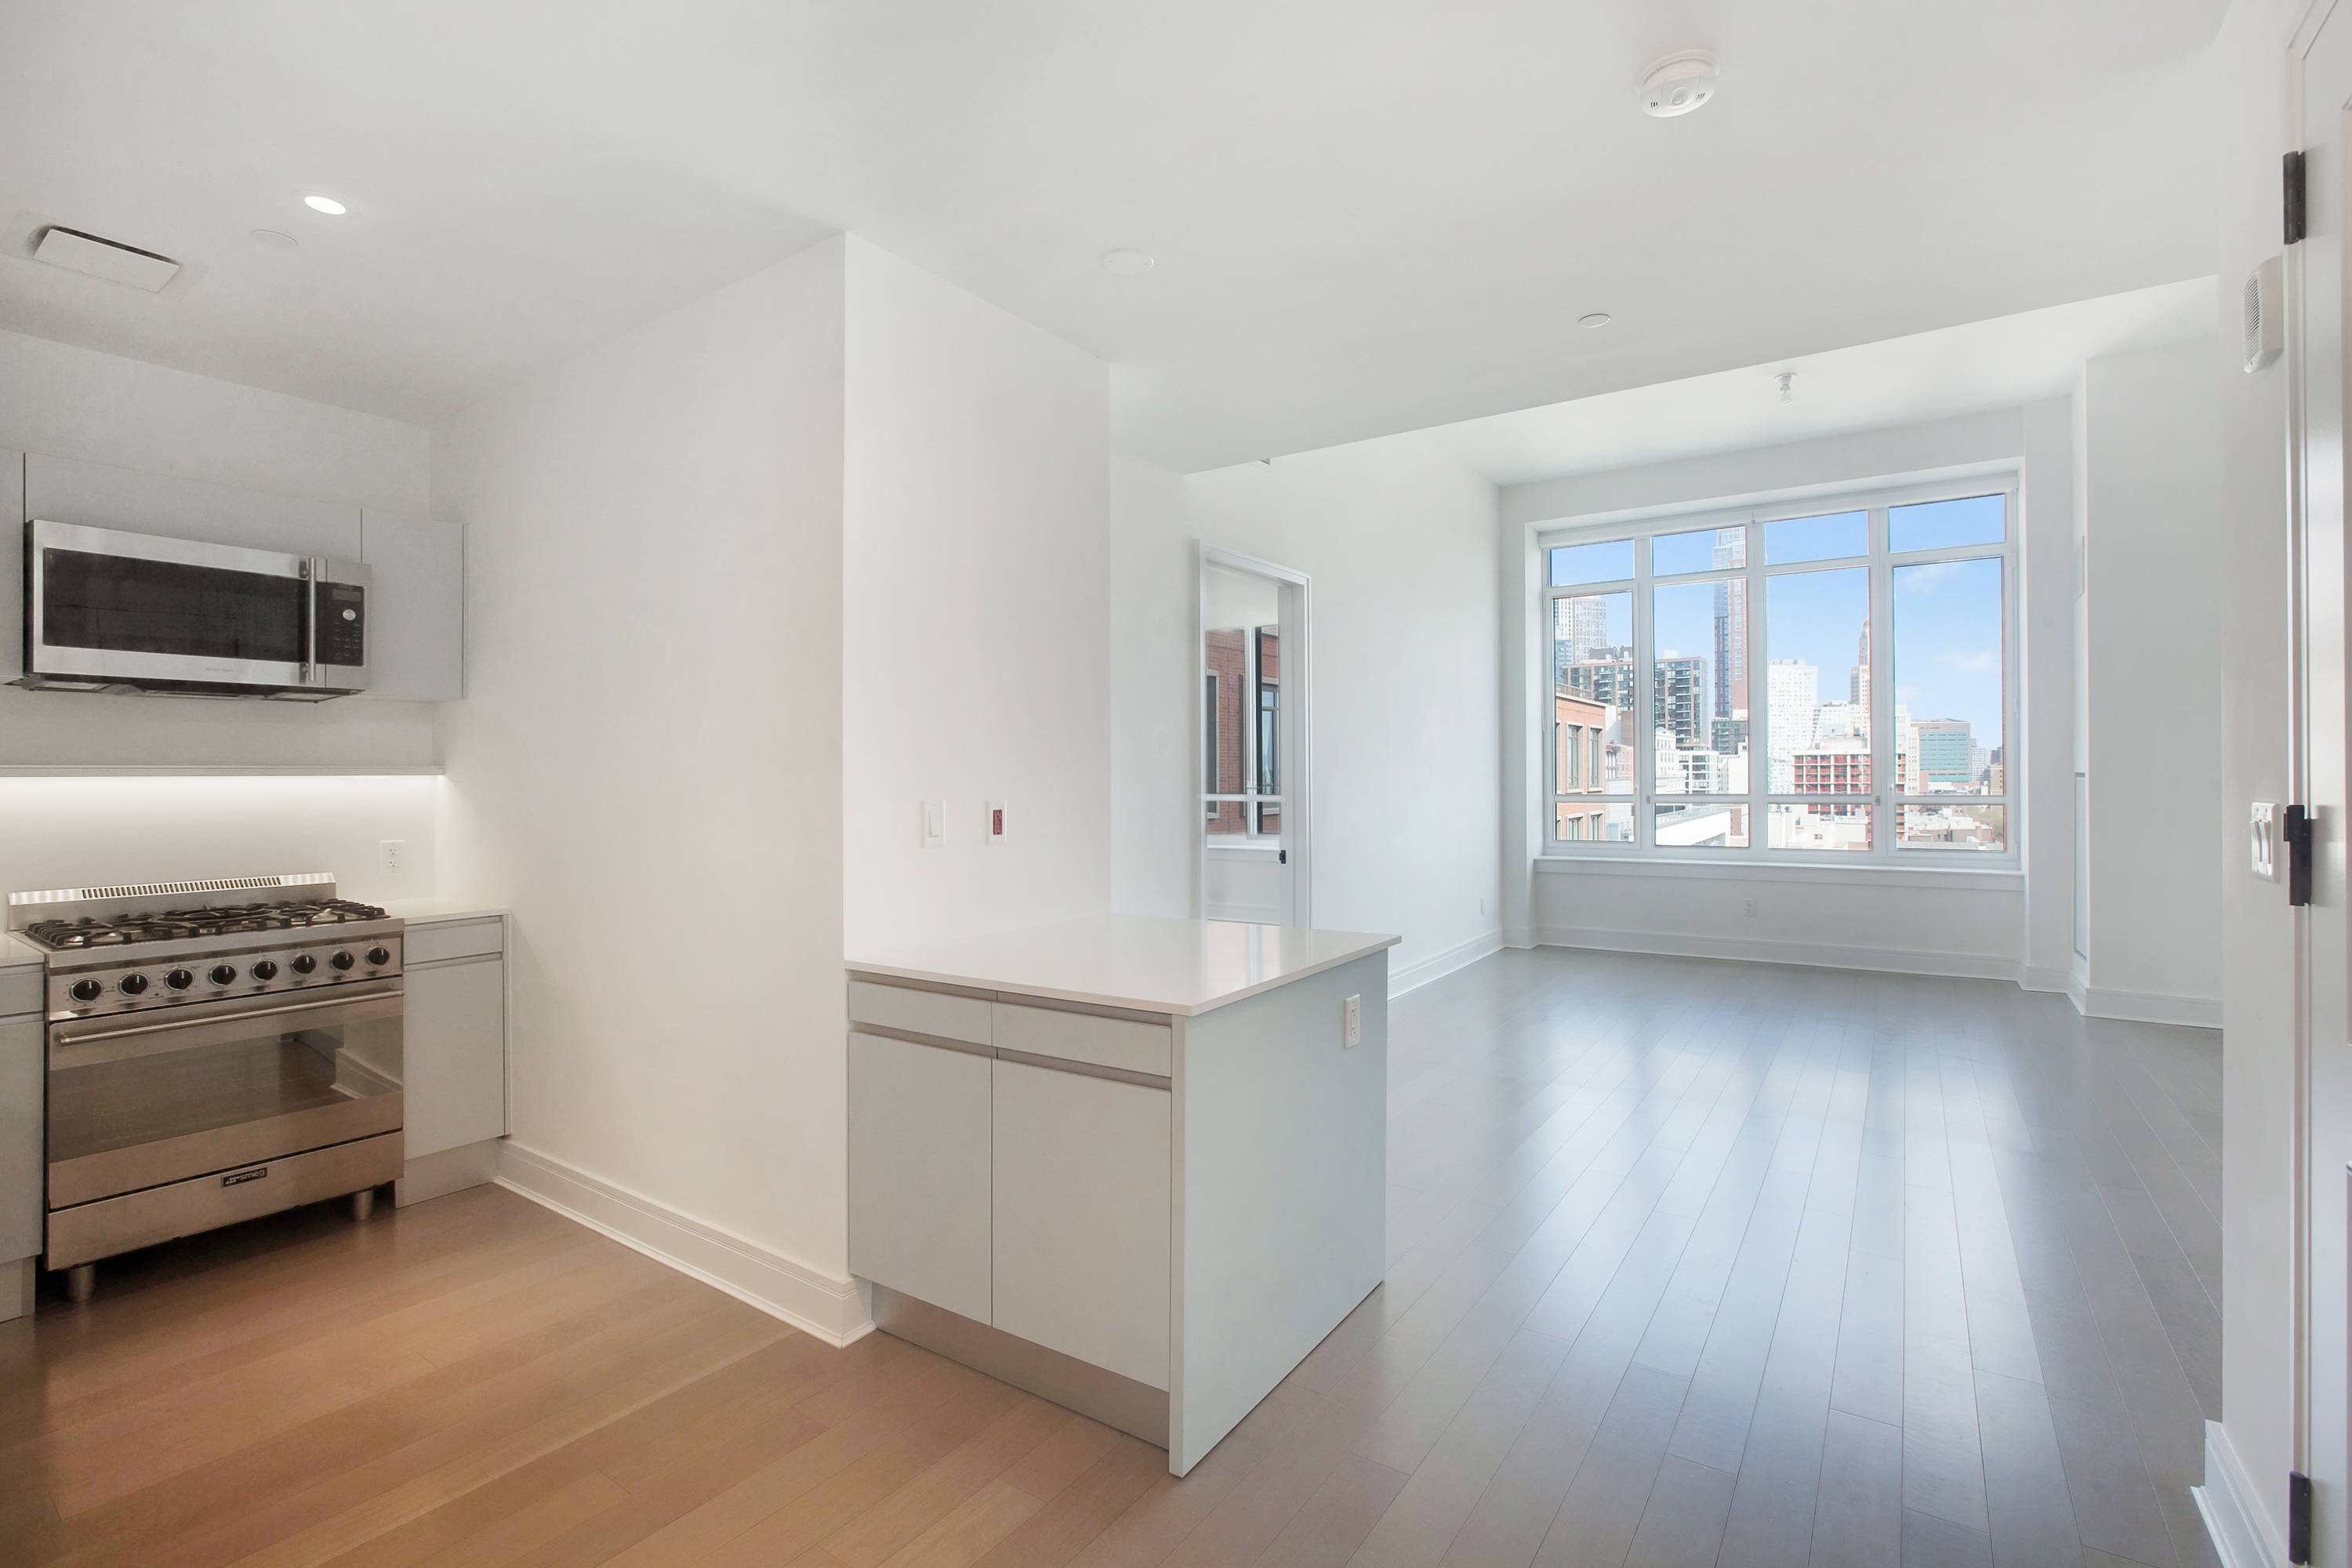 Welcome home to the most dramatic views in Boerum Hill.